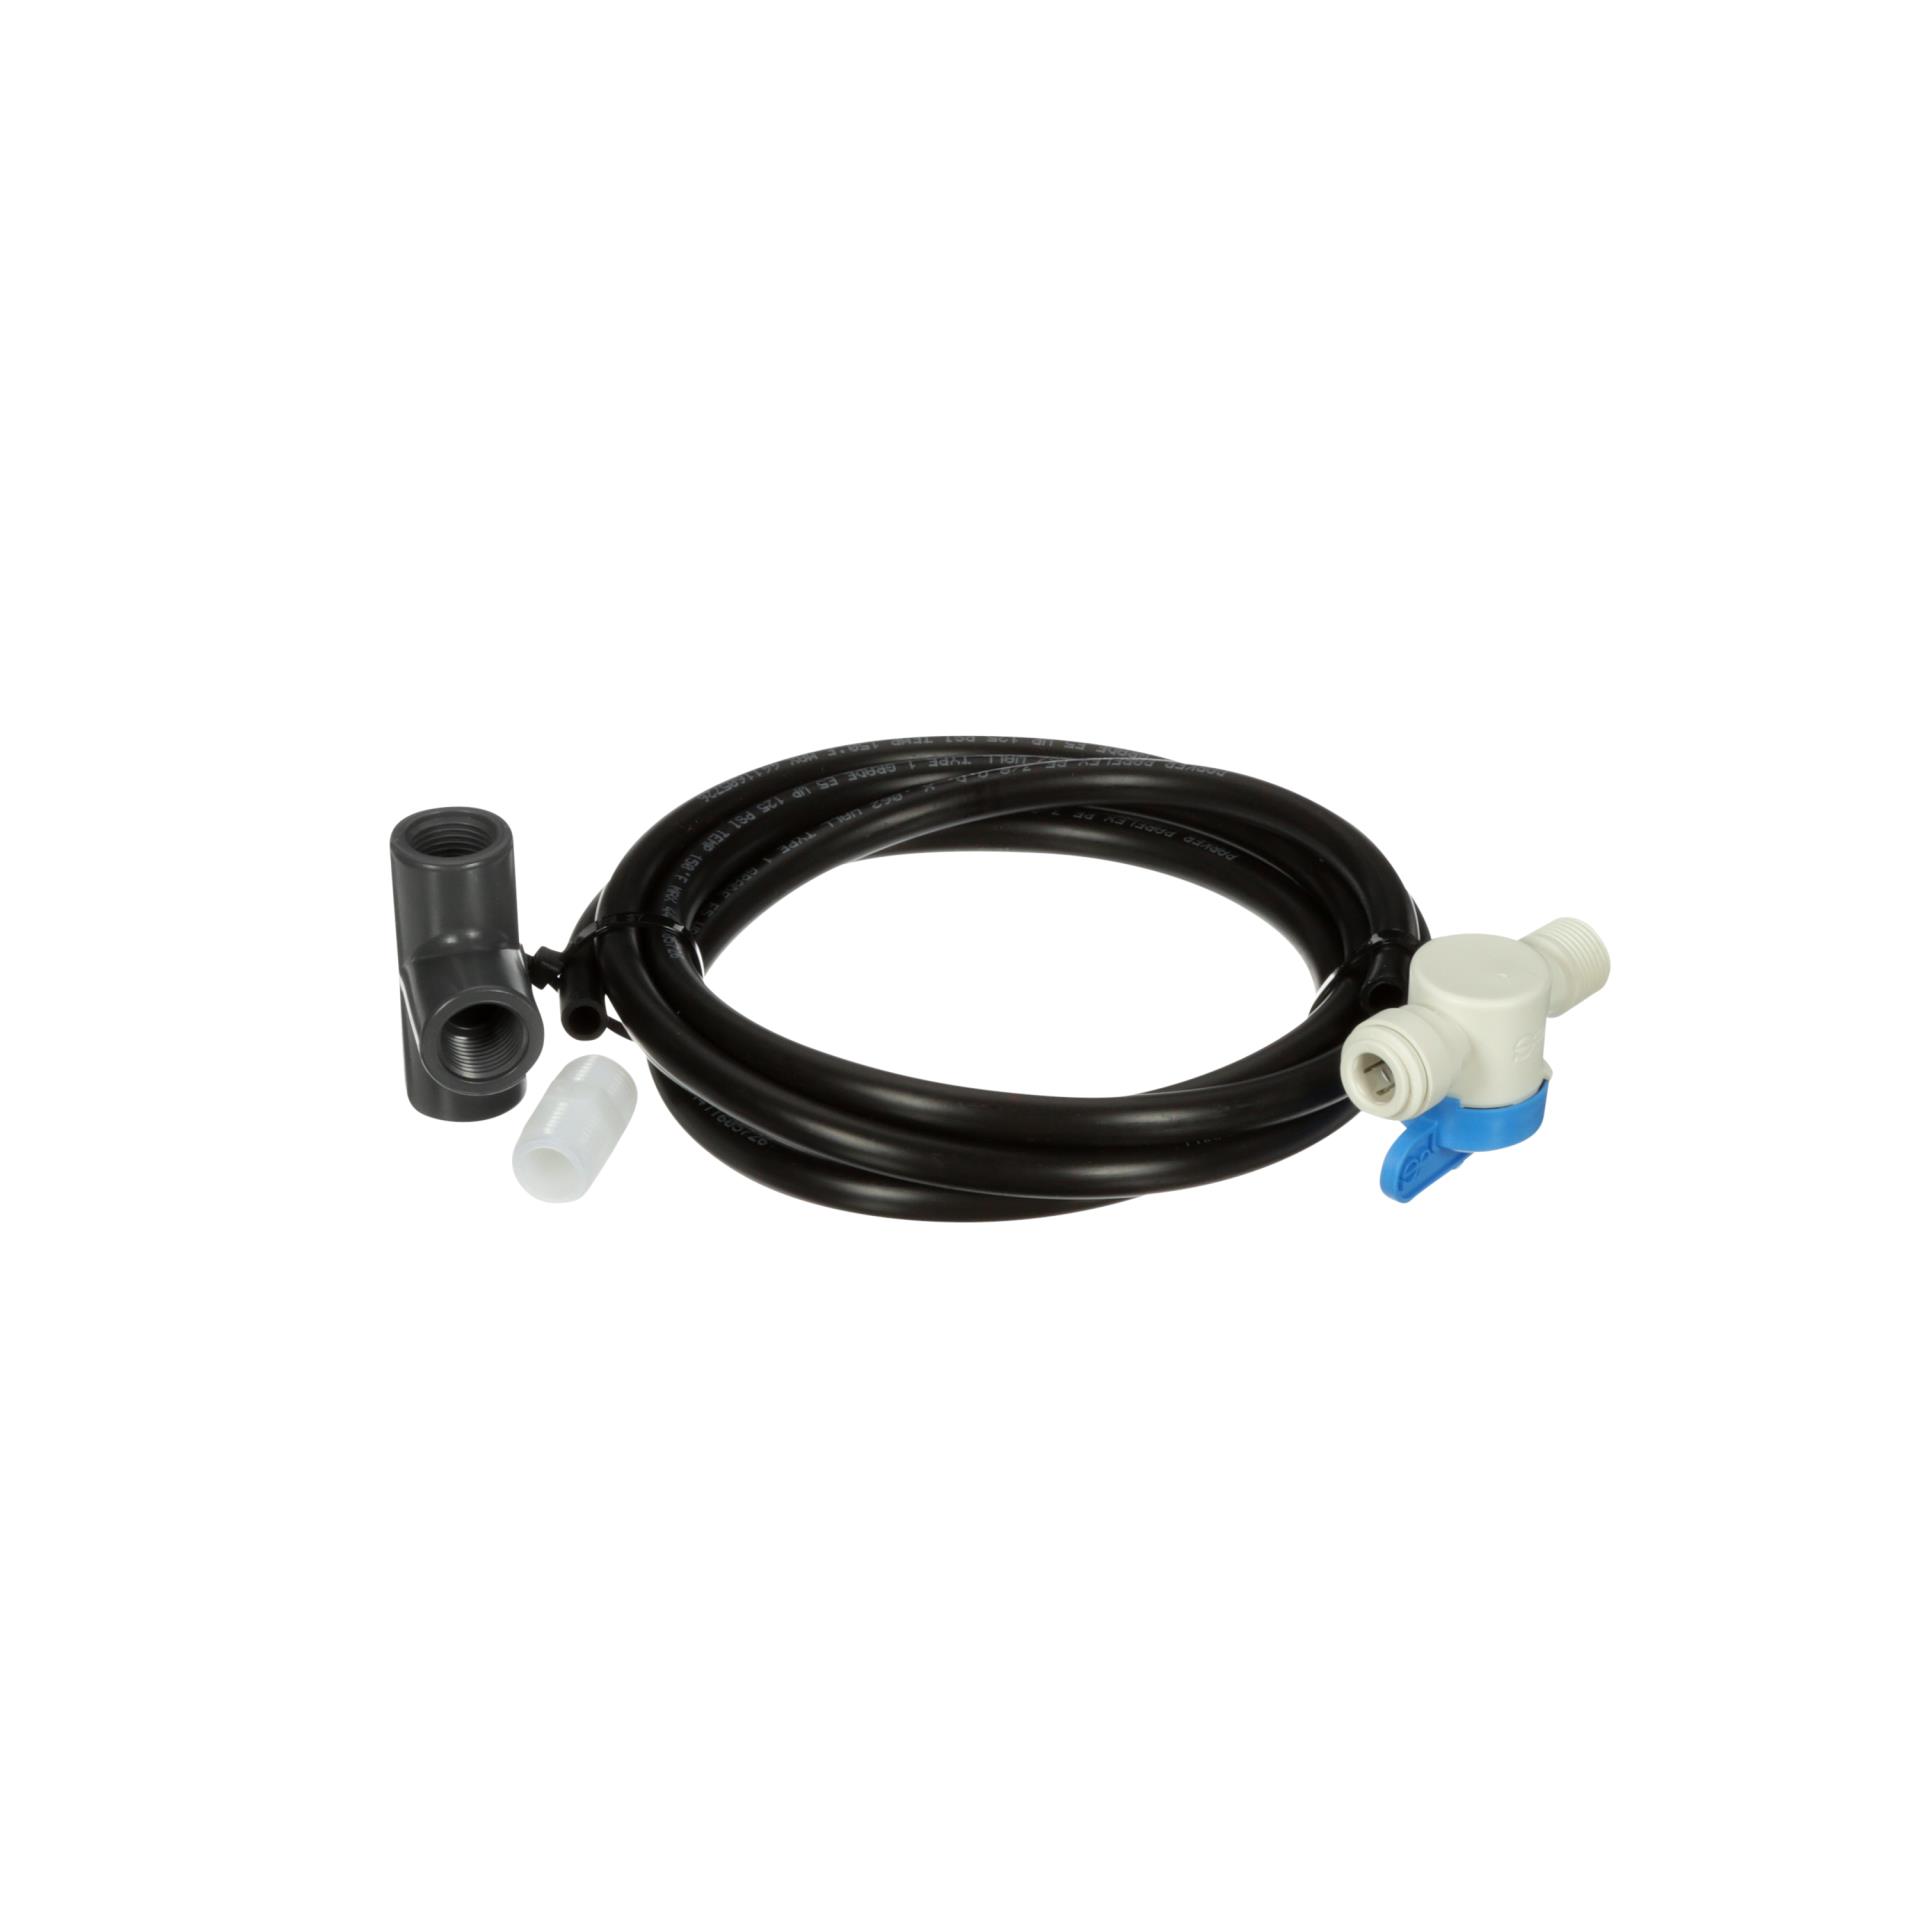 efficiently secures wire bundles and harness components 3M™ Cable Tie CT6BK40-C